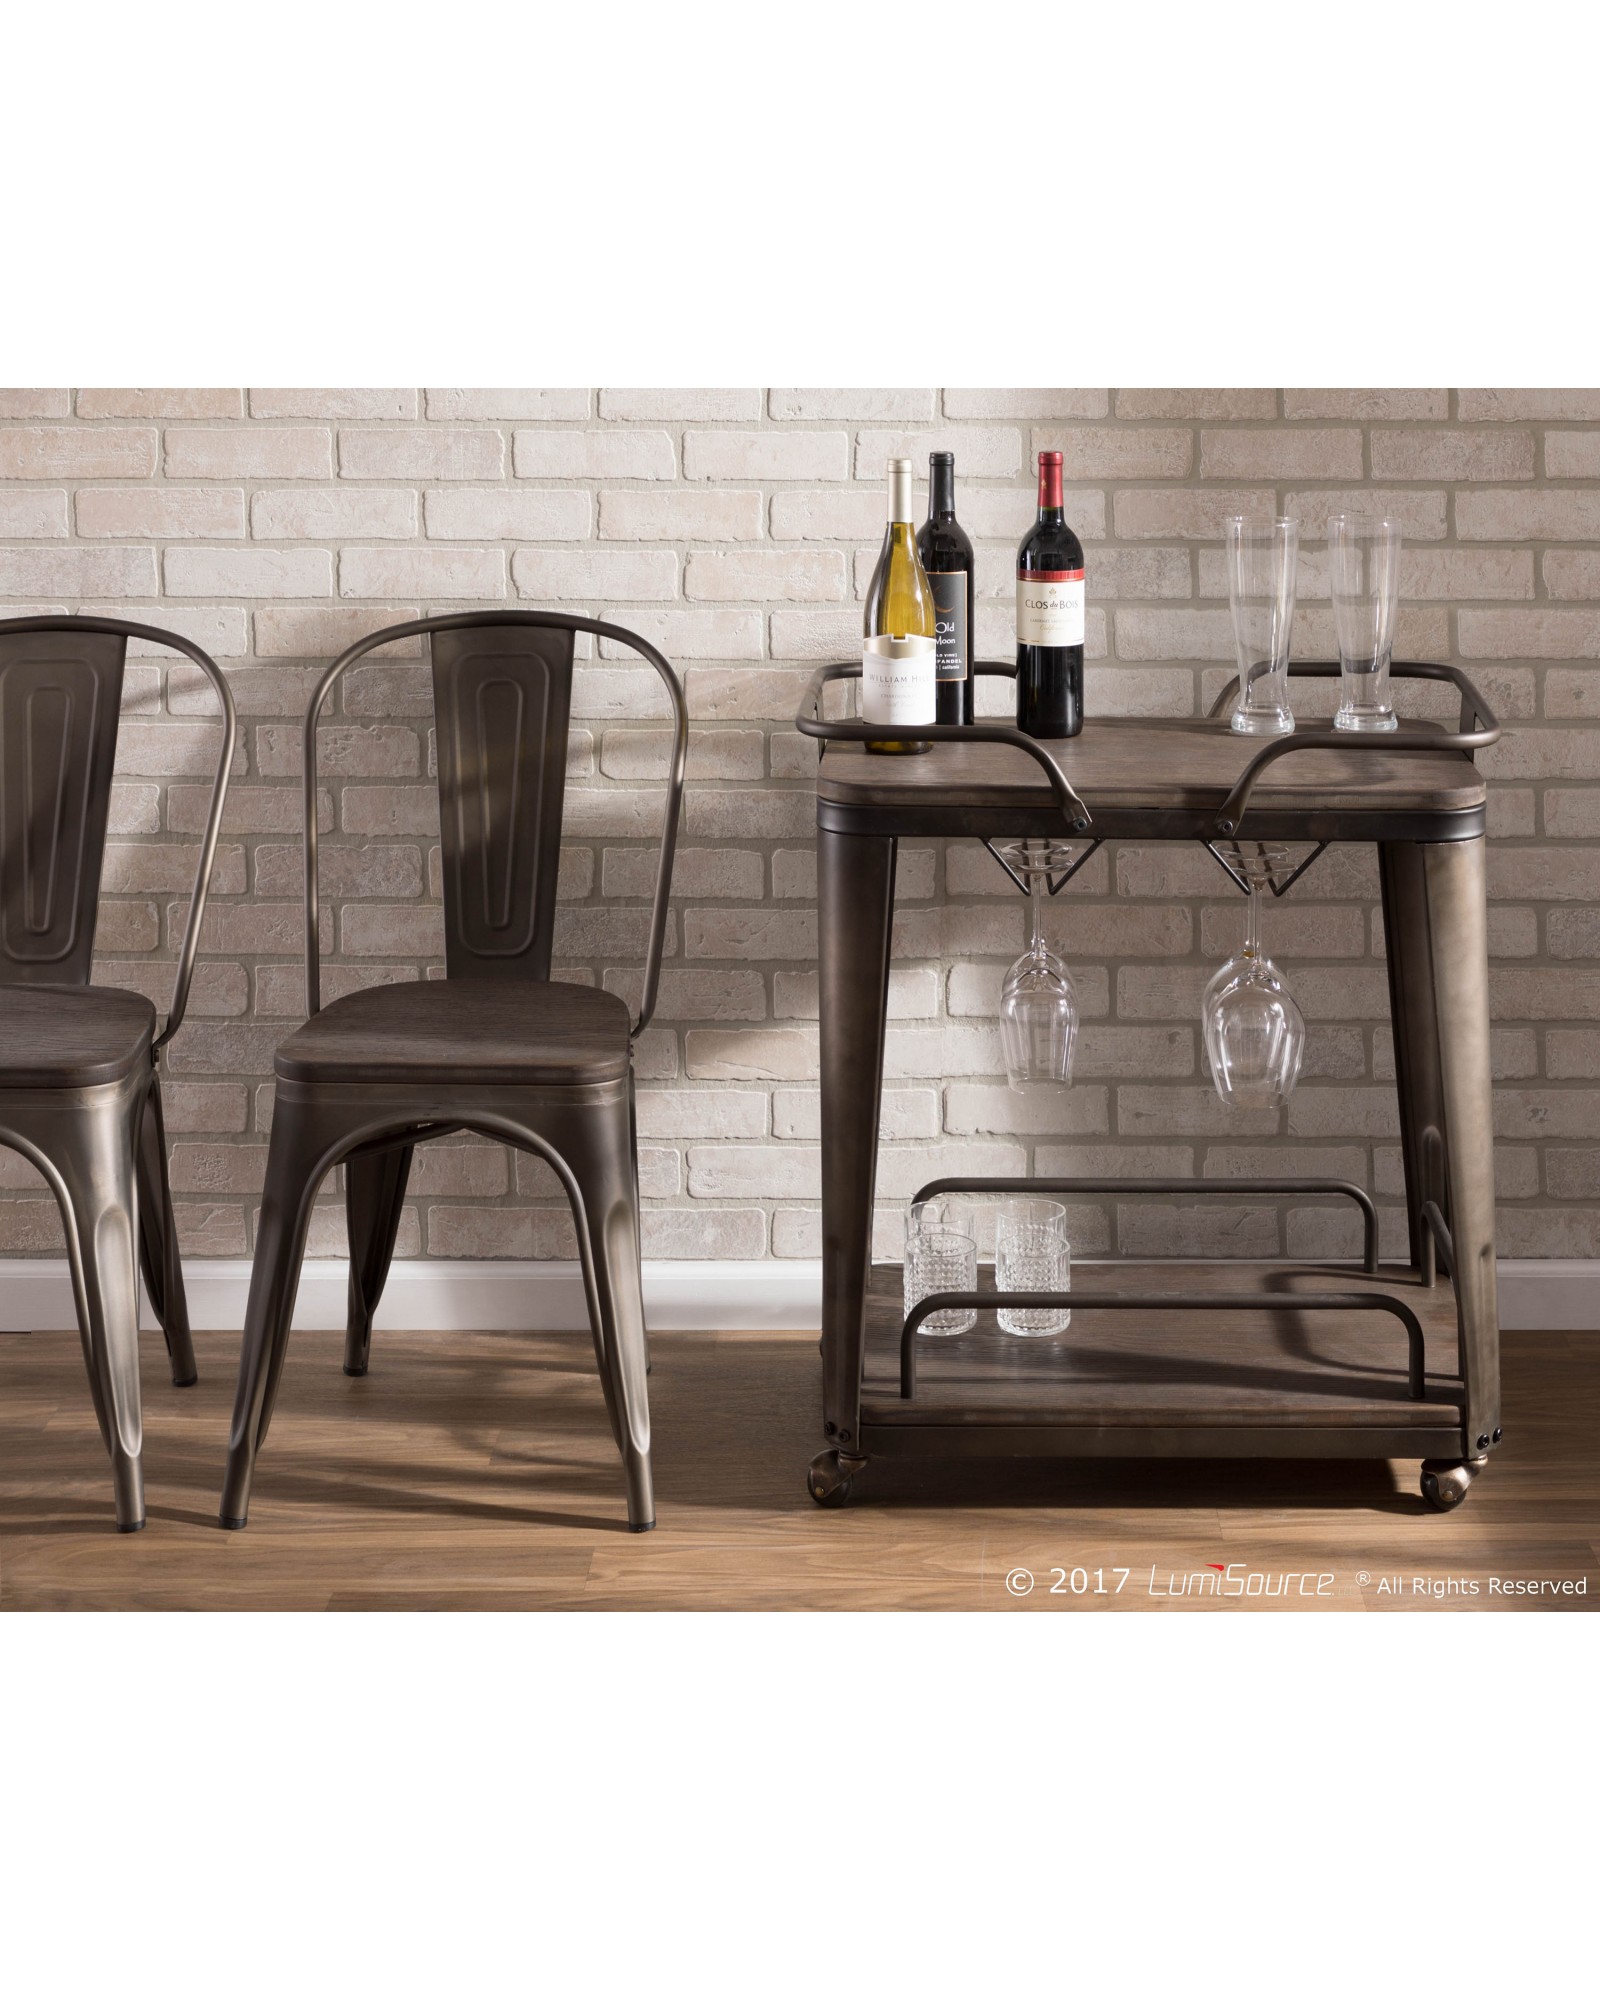 Oregon Industrial-Farmhouse Stackable Dining Chair in Antique and Espresso - Set of 2